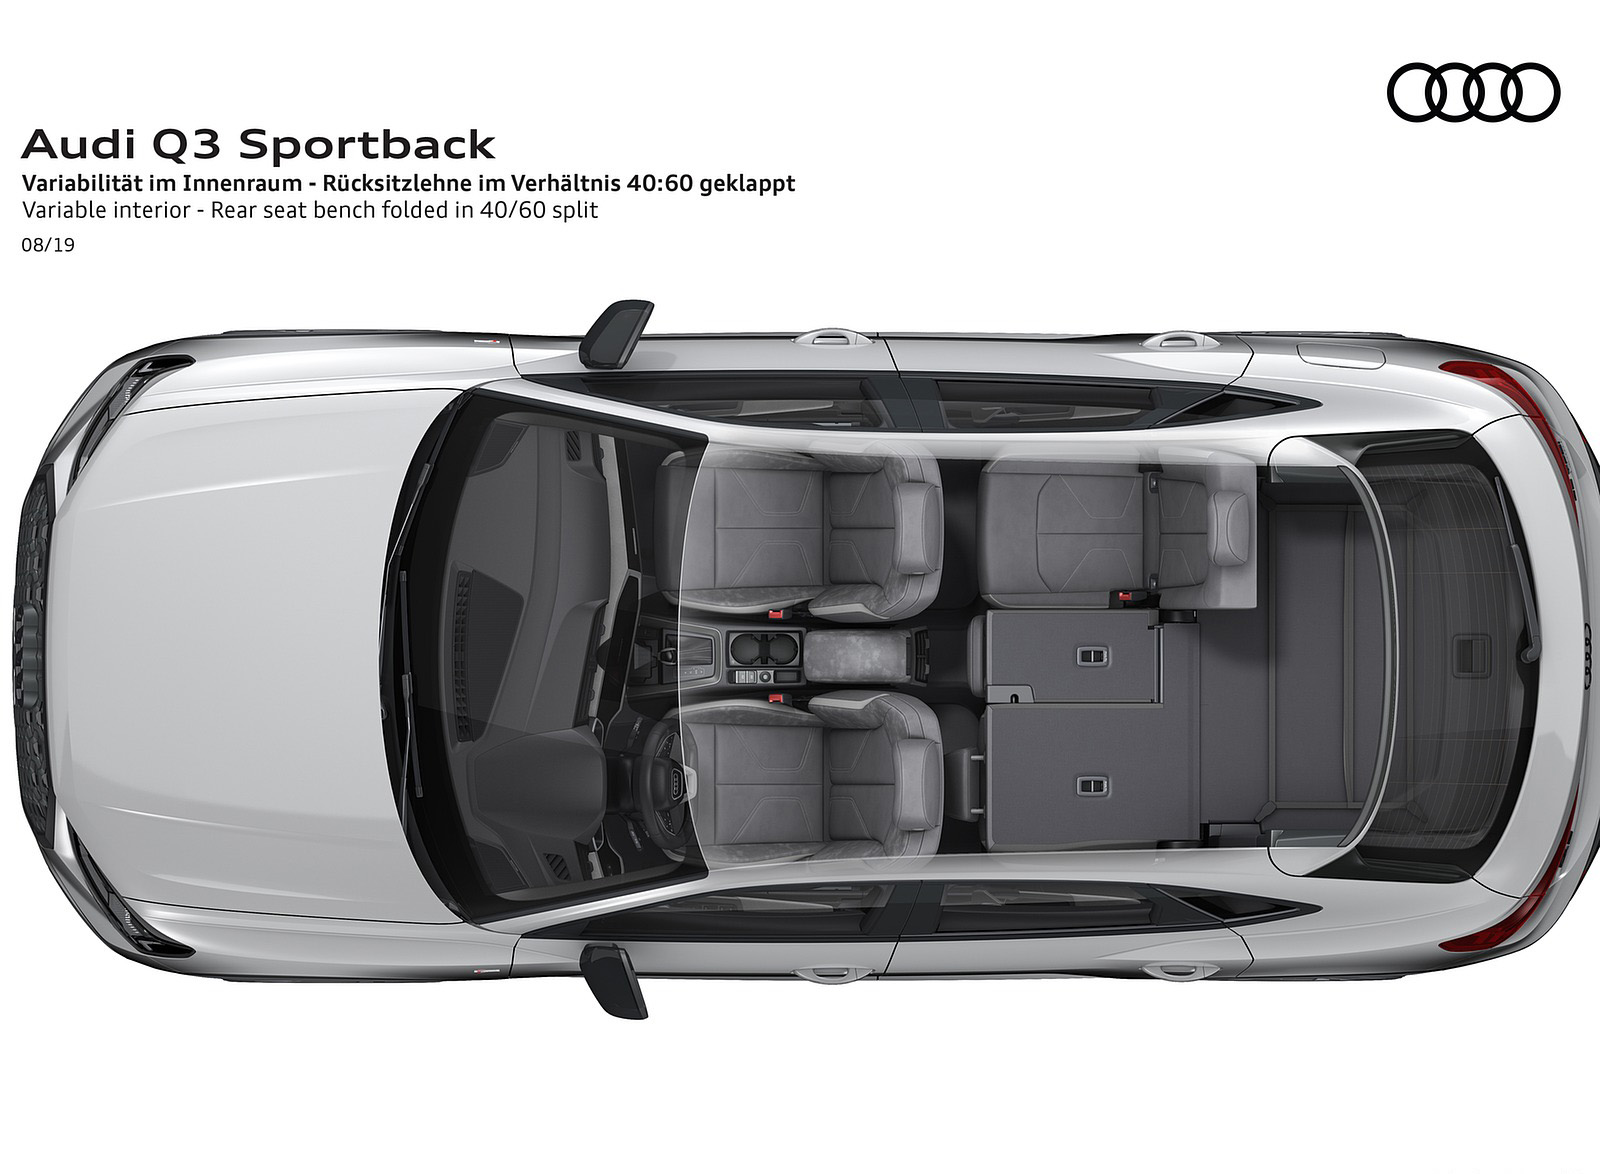 2020 Audi Q3 Sportback Variable interior Rear seat bench folded Wallpapers #265 of 285